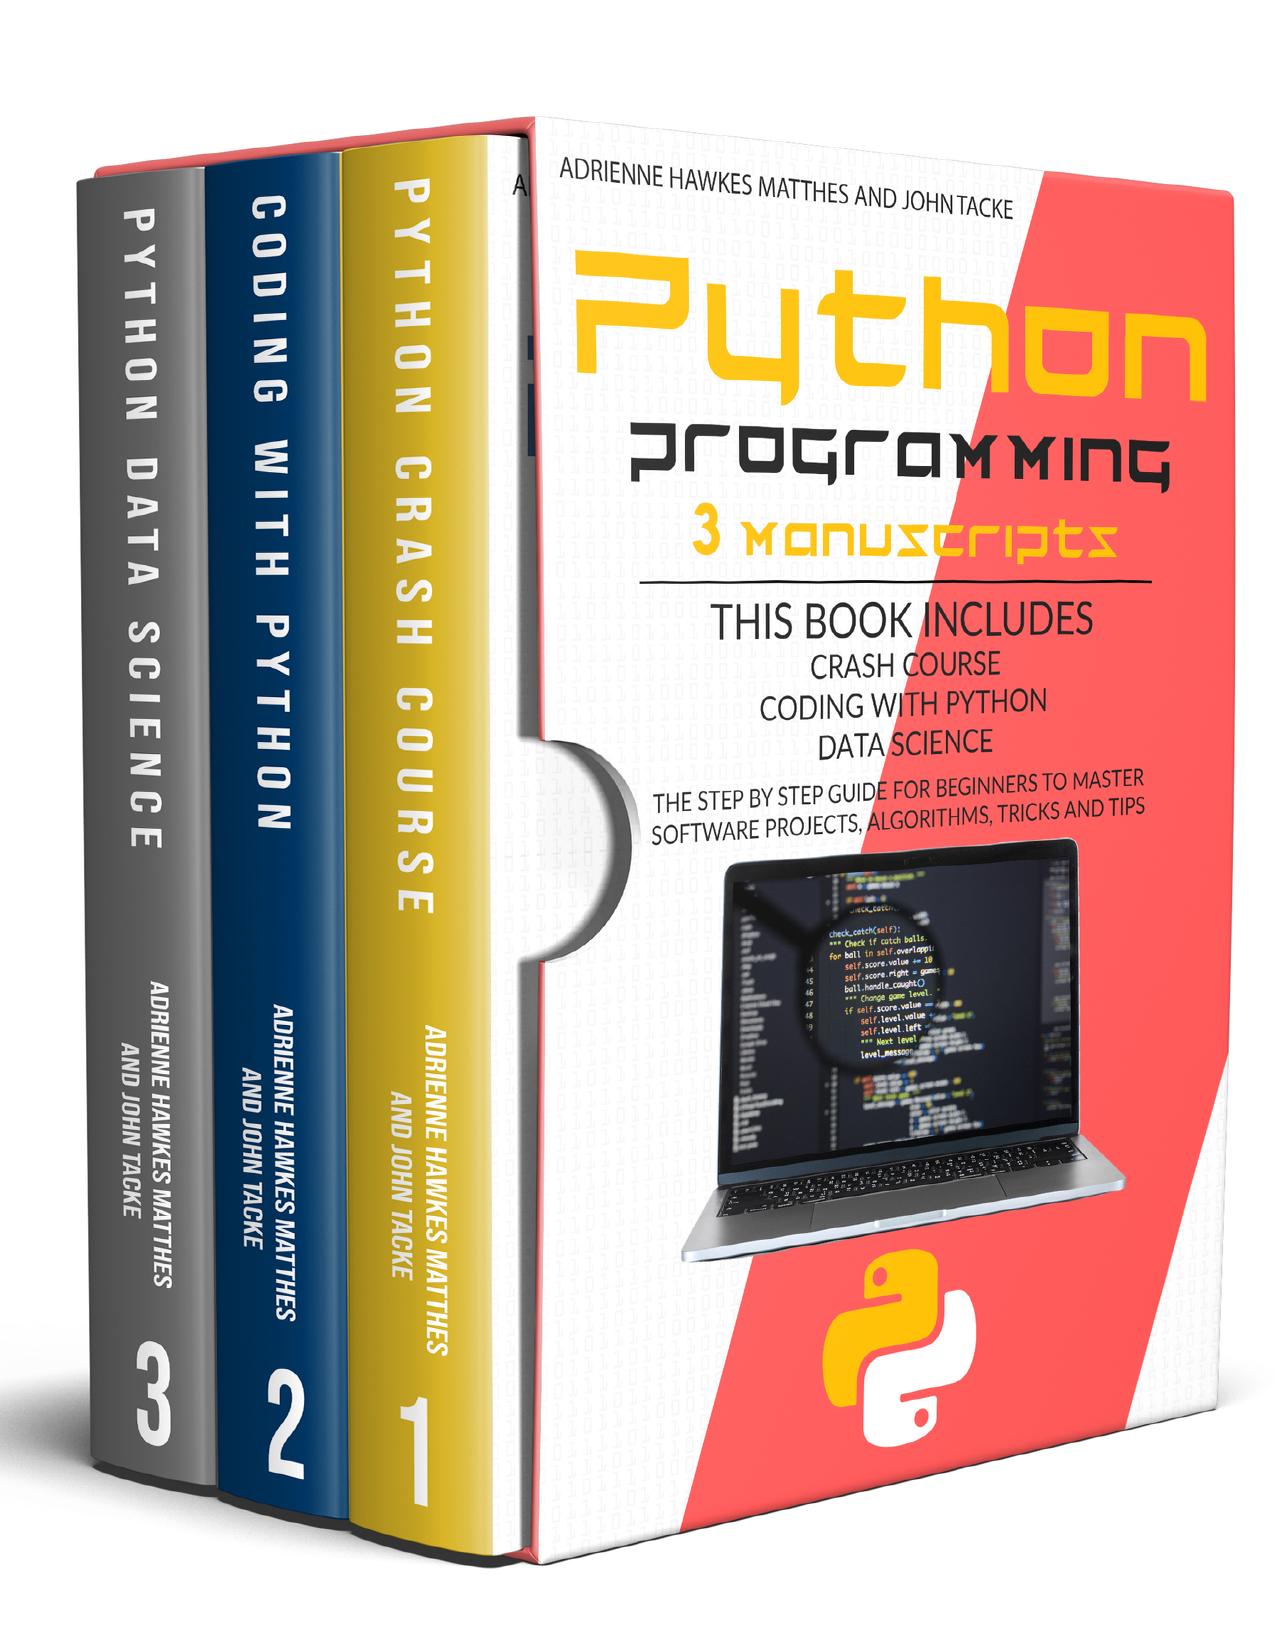 Python Programming: 3 Manuscripts Crash Course Coding with Python Data Science. The Step By Step Guide for Beginners to Master Software Projects, Algorithms, Tricks and Tips